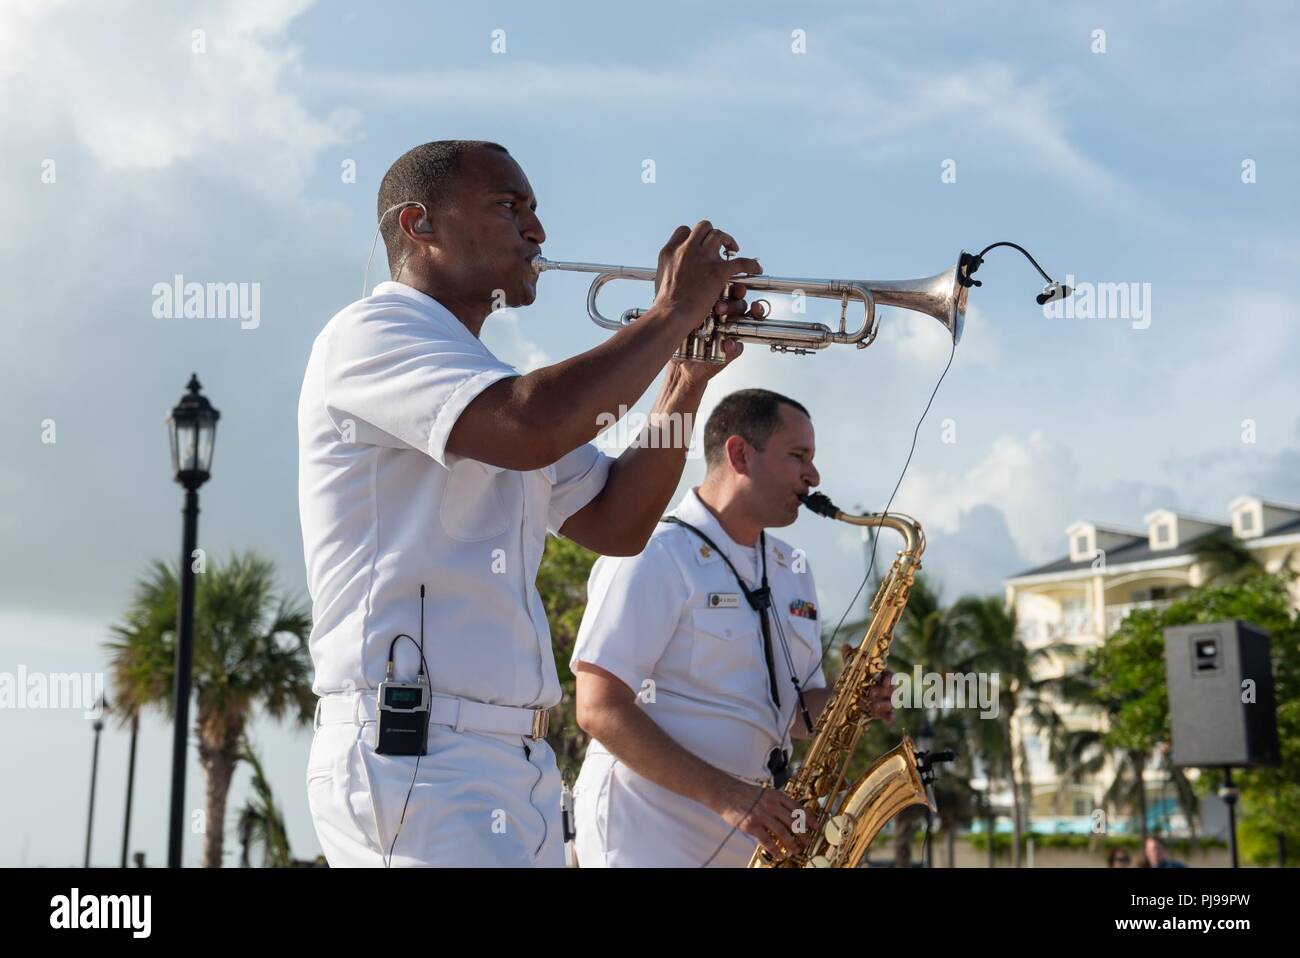 KEY WEST, Fla. (July 9, 2018) Musicians 1st Class David Smith, left, and Manuel Pelayo de Gongora perform with the U.S. Navy Band Cruisers popular music group during a concert at Mallory Square in Key West, Fla. The Navy Band performed in seven cities in Florida, connecting communities to the Navy and building awareness and support for the Navy. Stock Photo